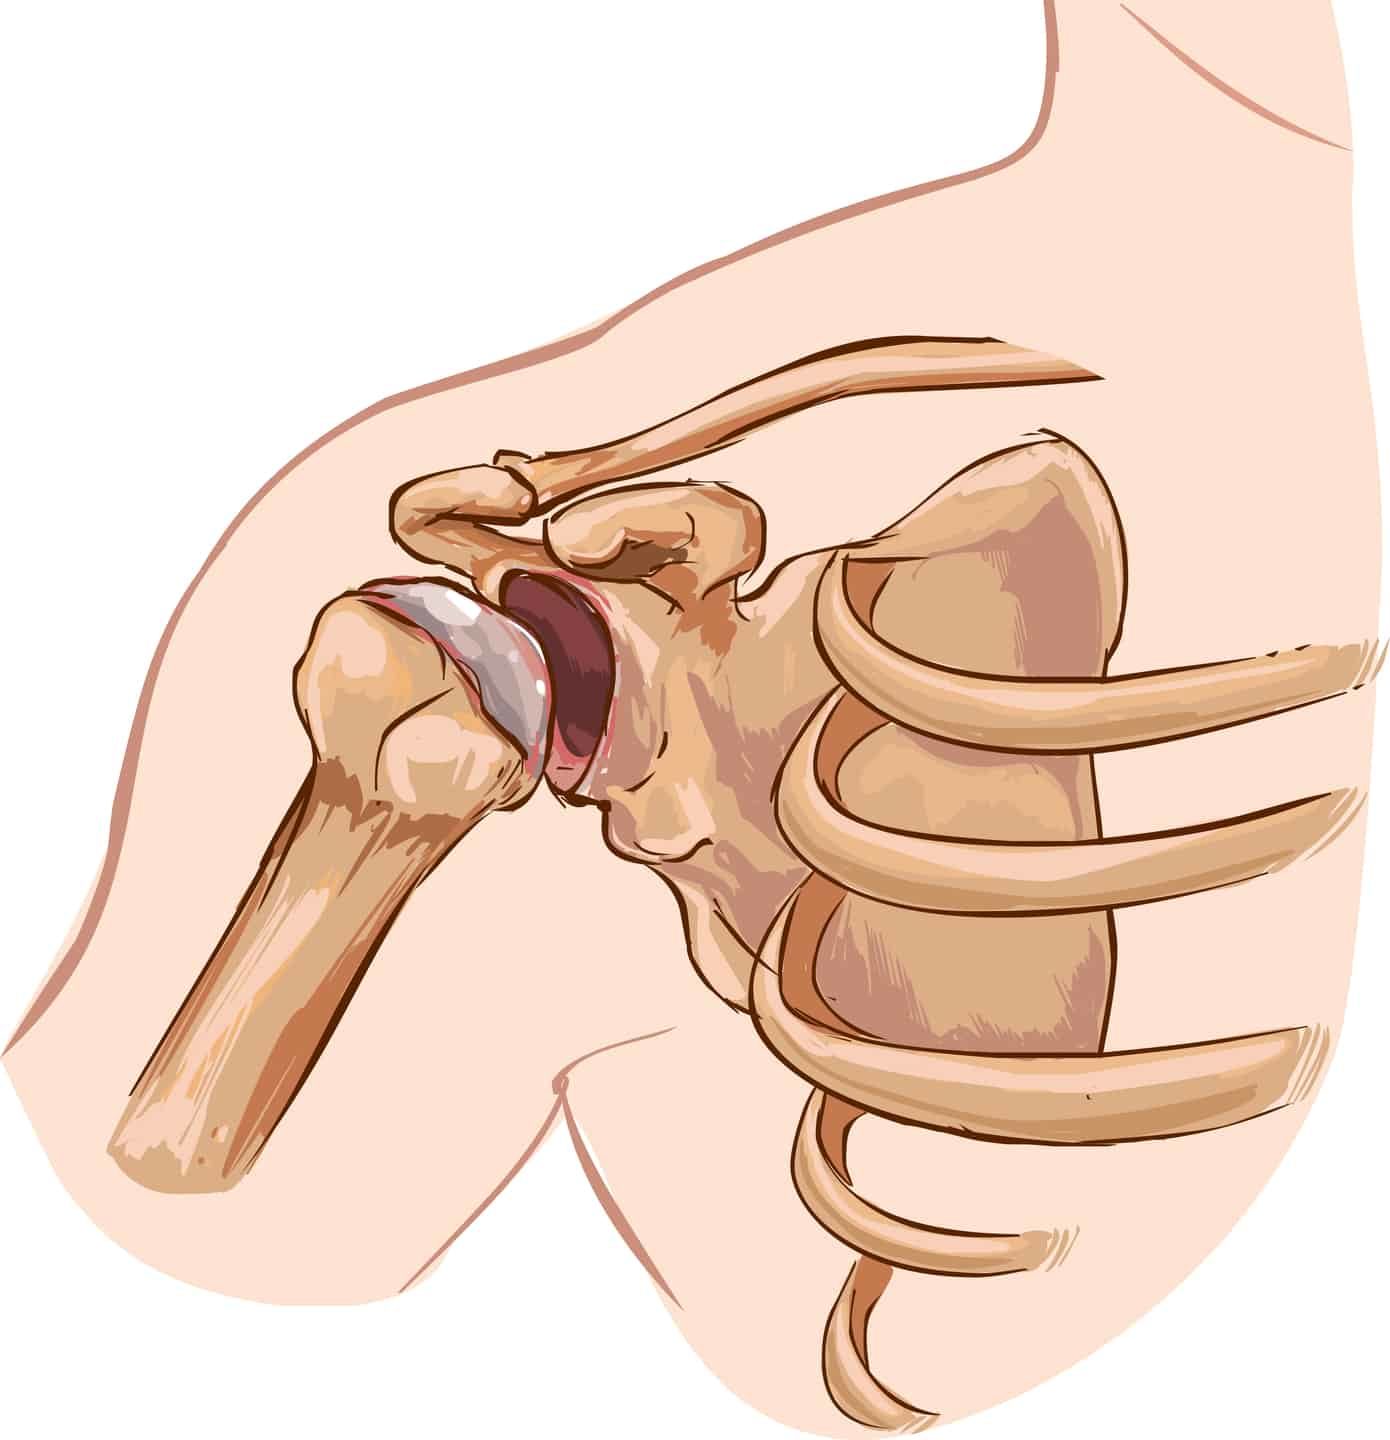 dislocated shoulder on a diagram